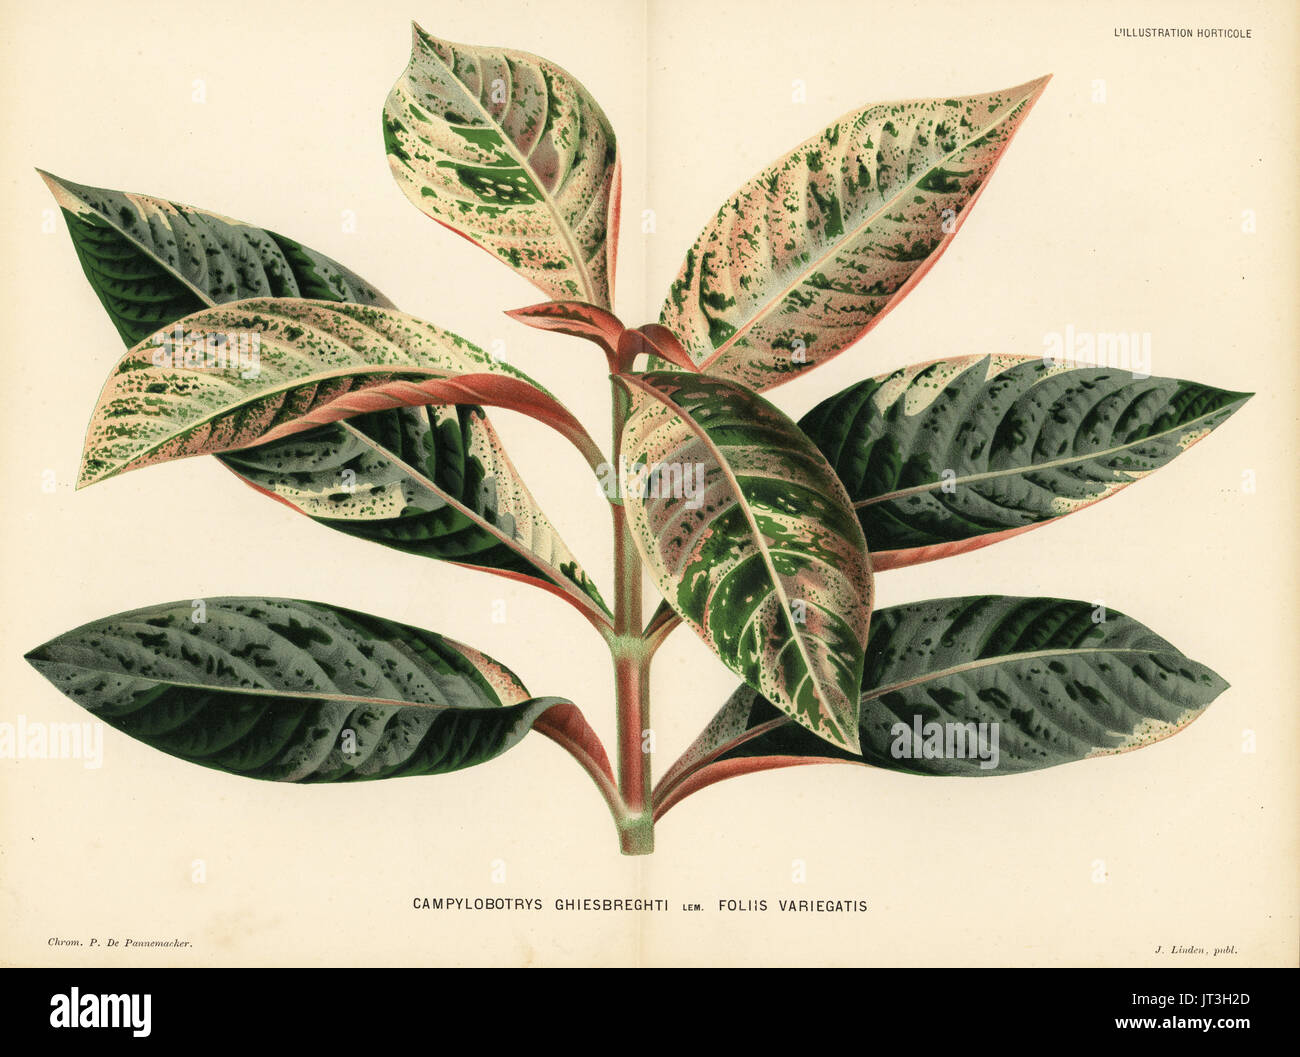 Hoffmannia ghiesbreghtii foliage plant (Campylobotrys ghiesbreghti foliis variegatis). Chromolithograph by P. de Pannemaeker from Jean Linden's l'Illustration Horticole, Brussels, 1883. Stock Photo